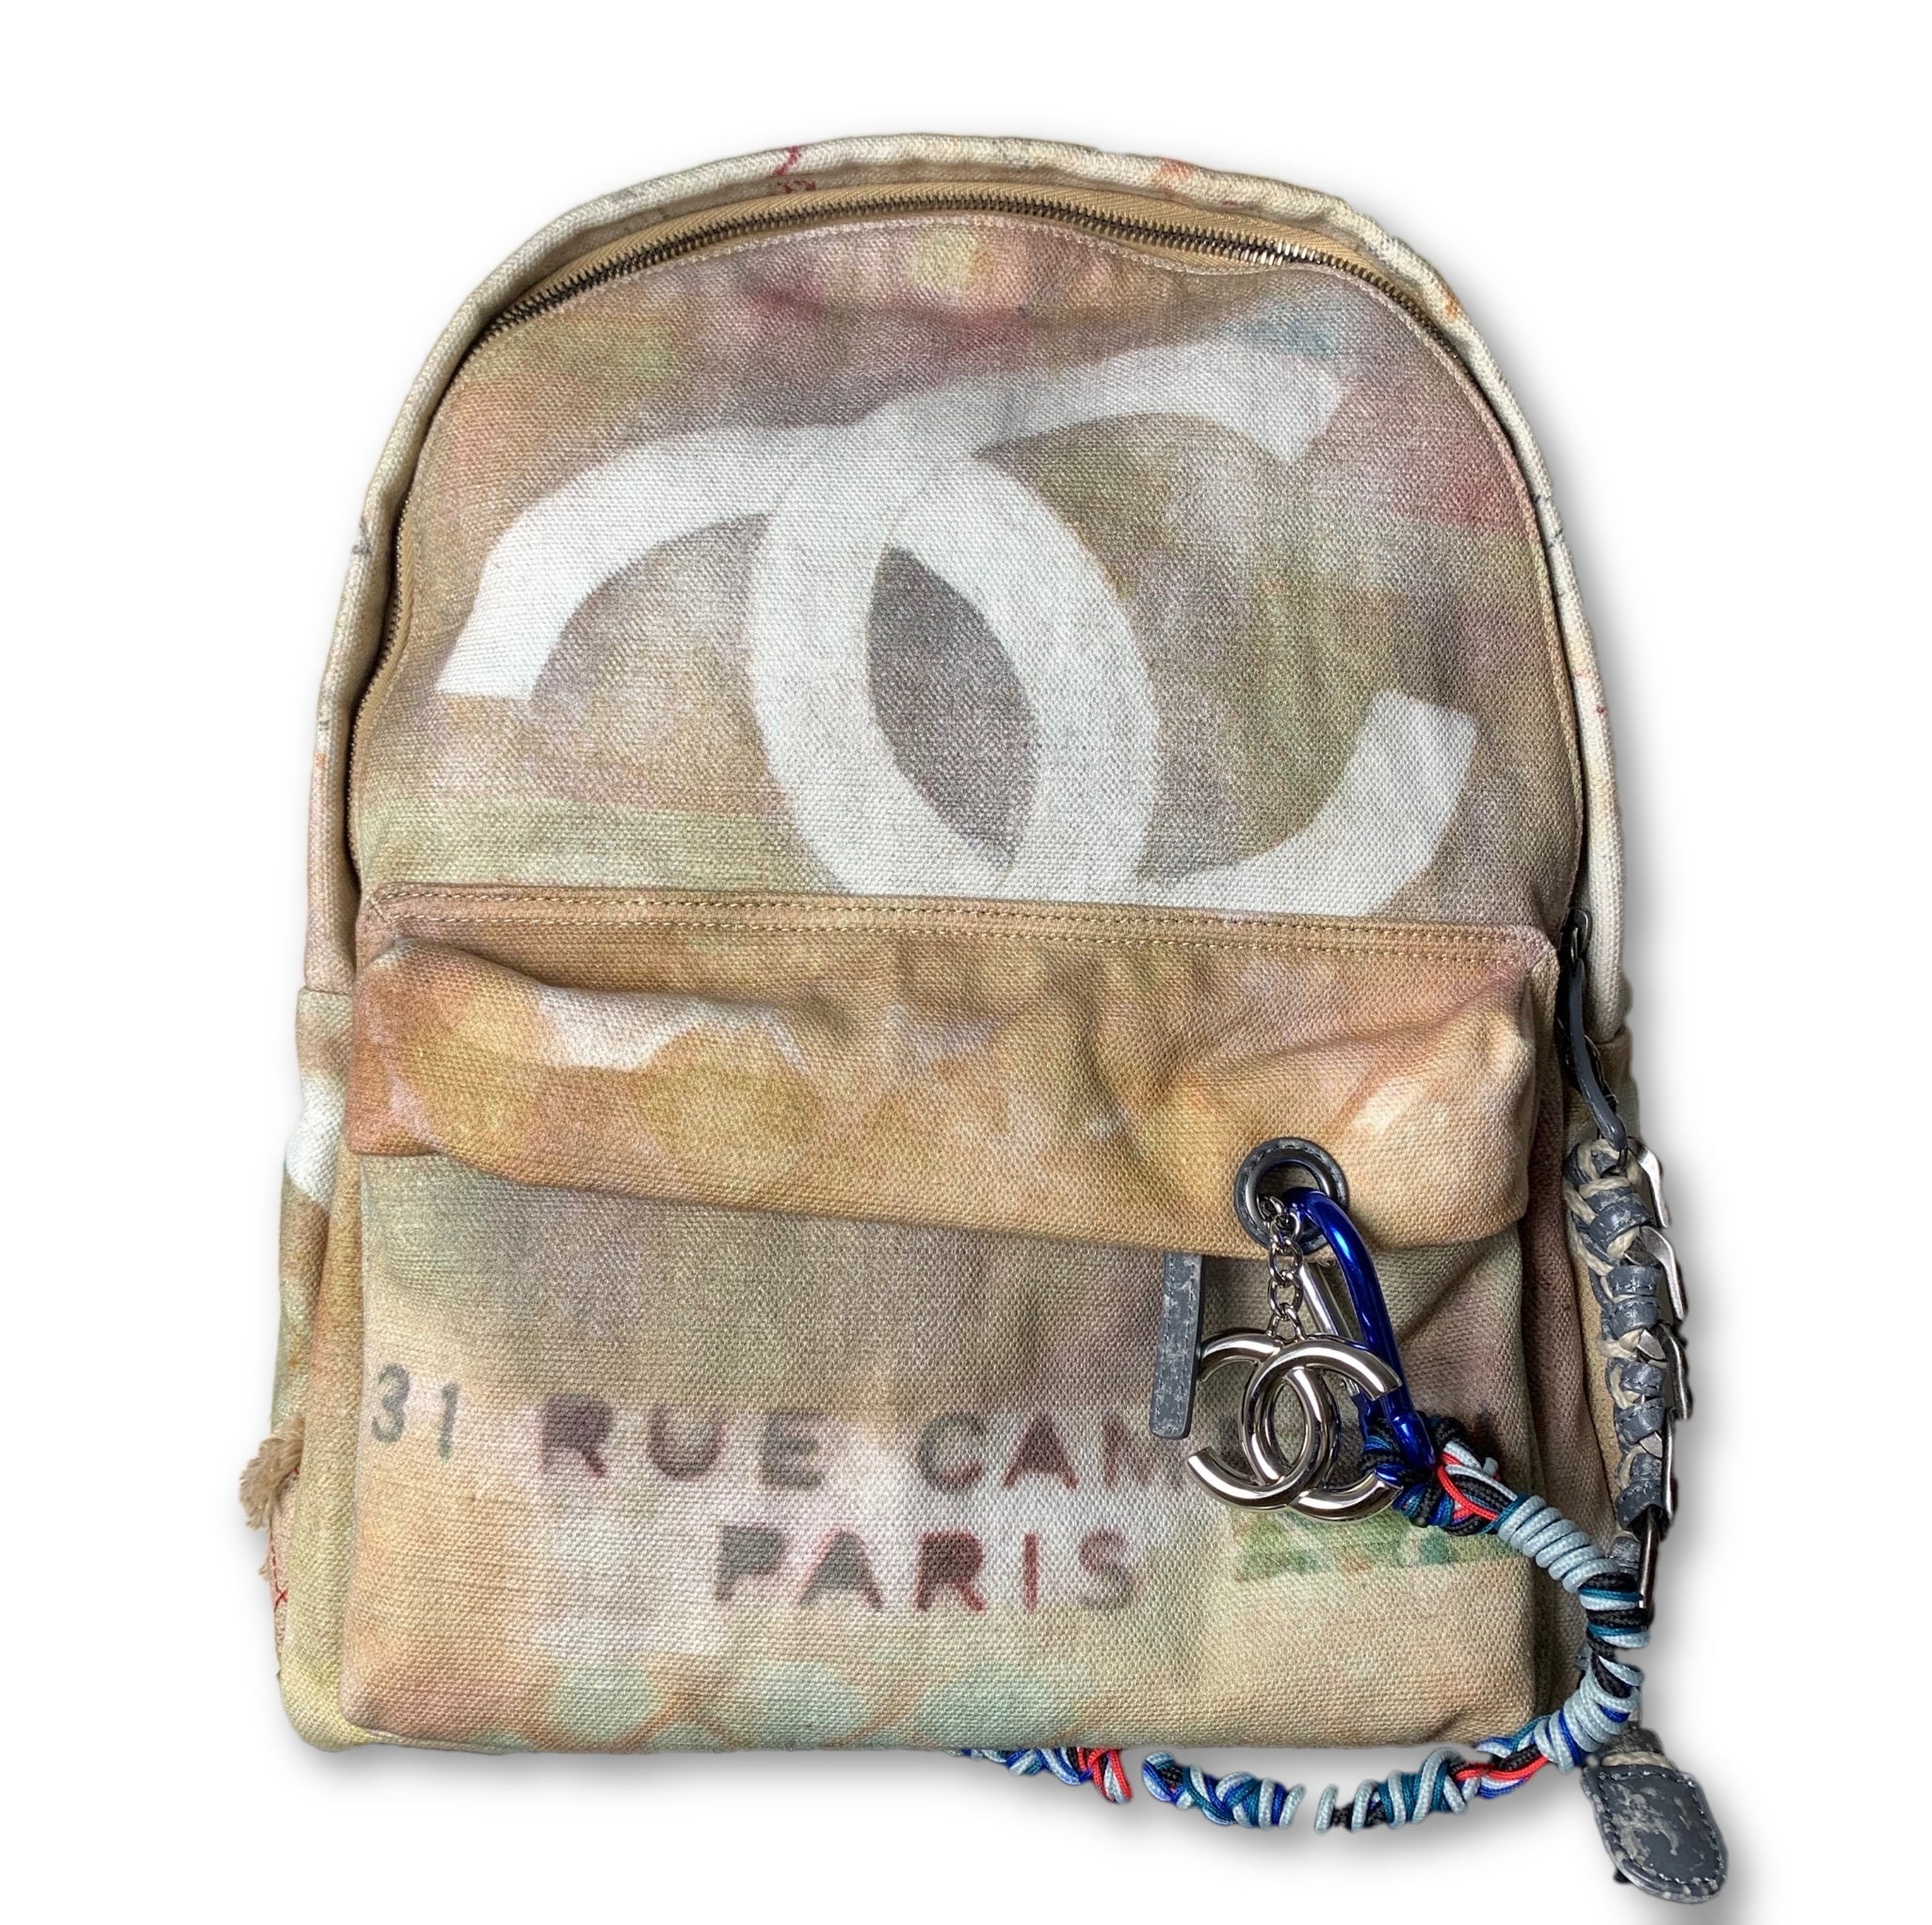 Chanel Chanel Graffiti Printed Canvas Backpack Large New In Box Justin Reed New York